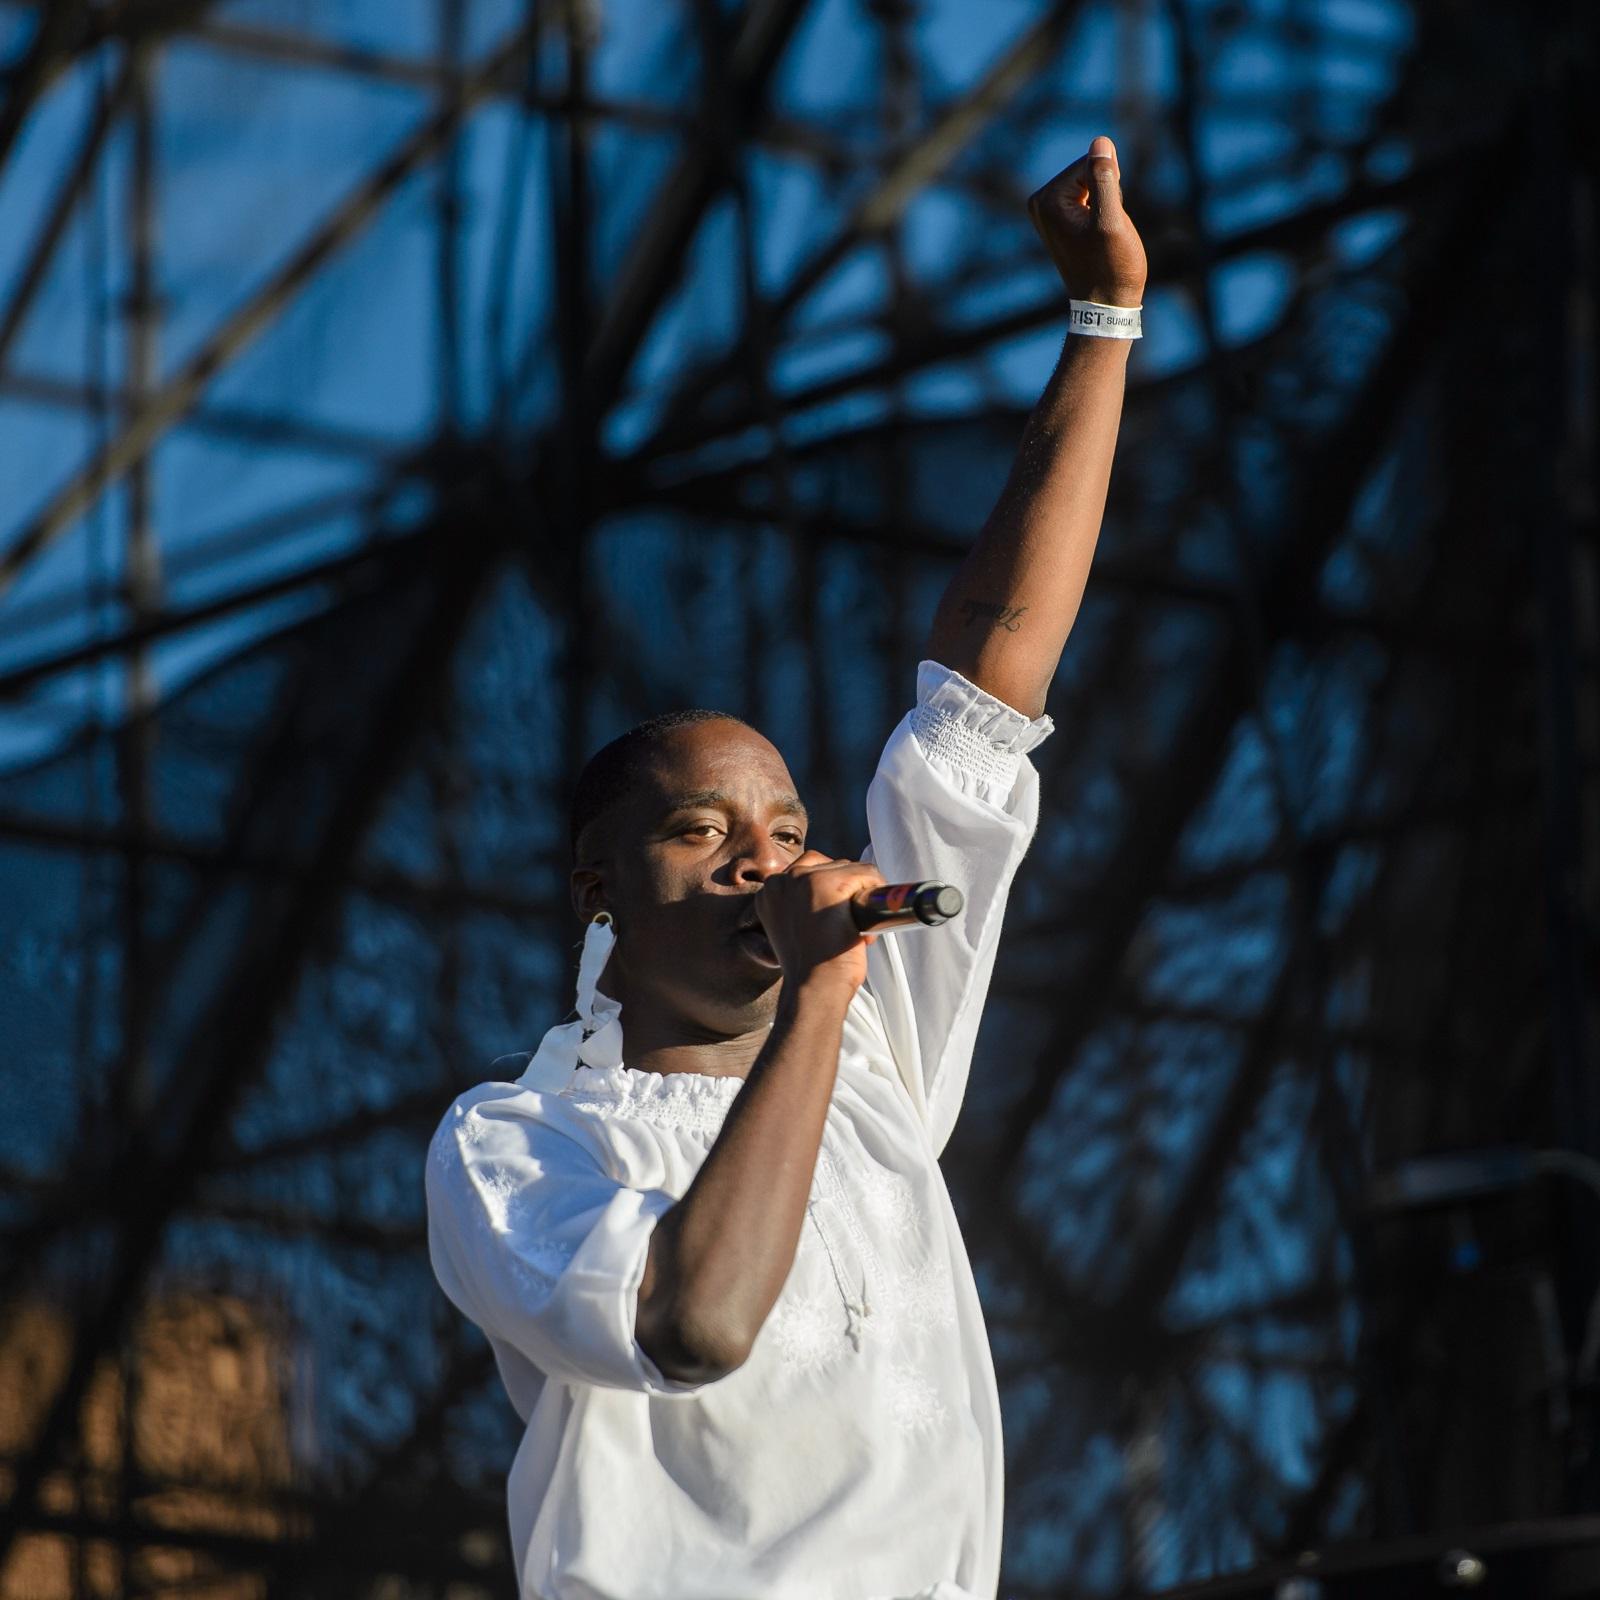 The Martell Afropunk festival experience